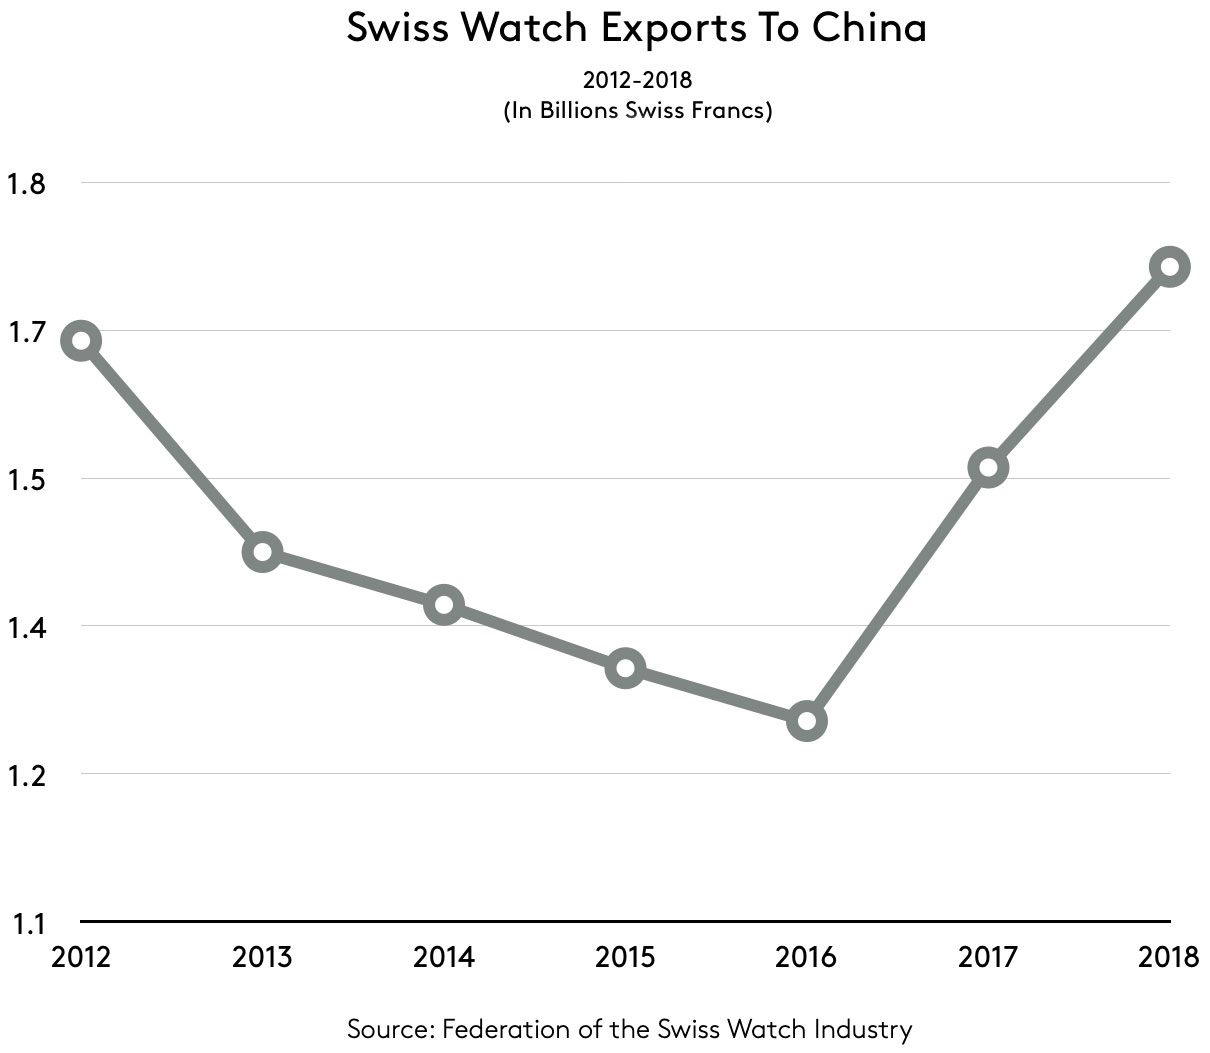  swiss watch export to China 2012 to 2018